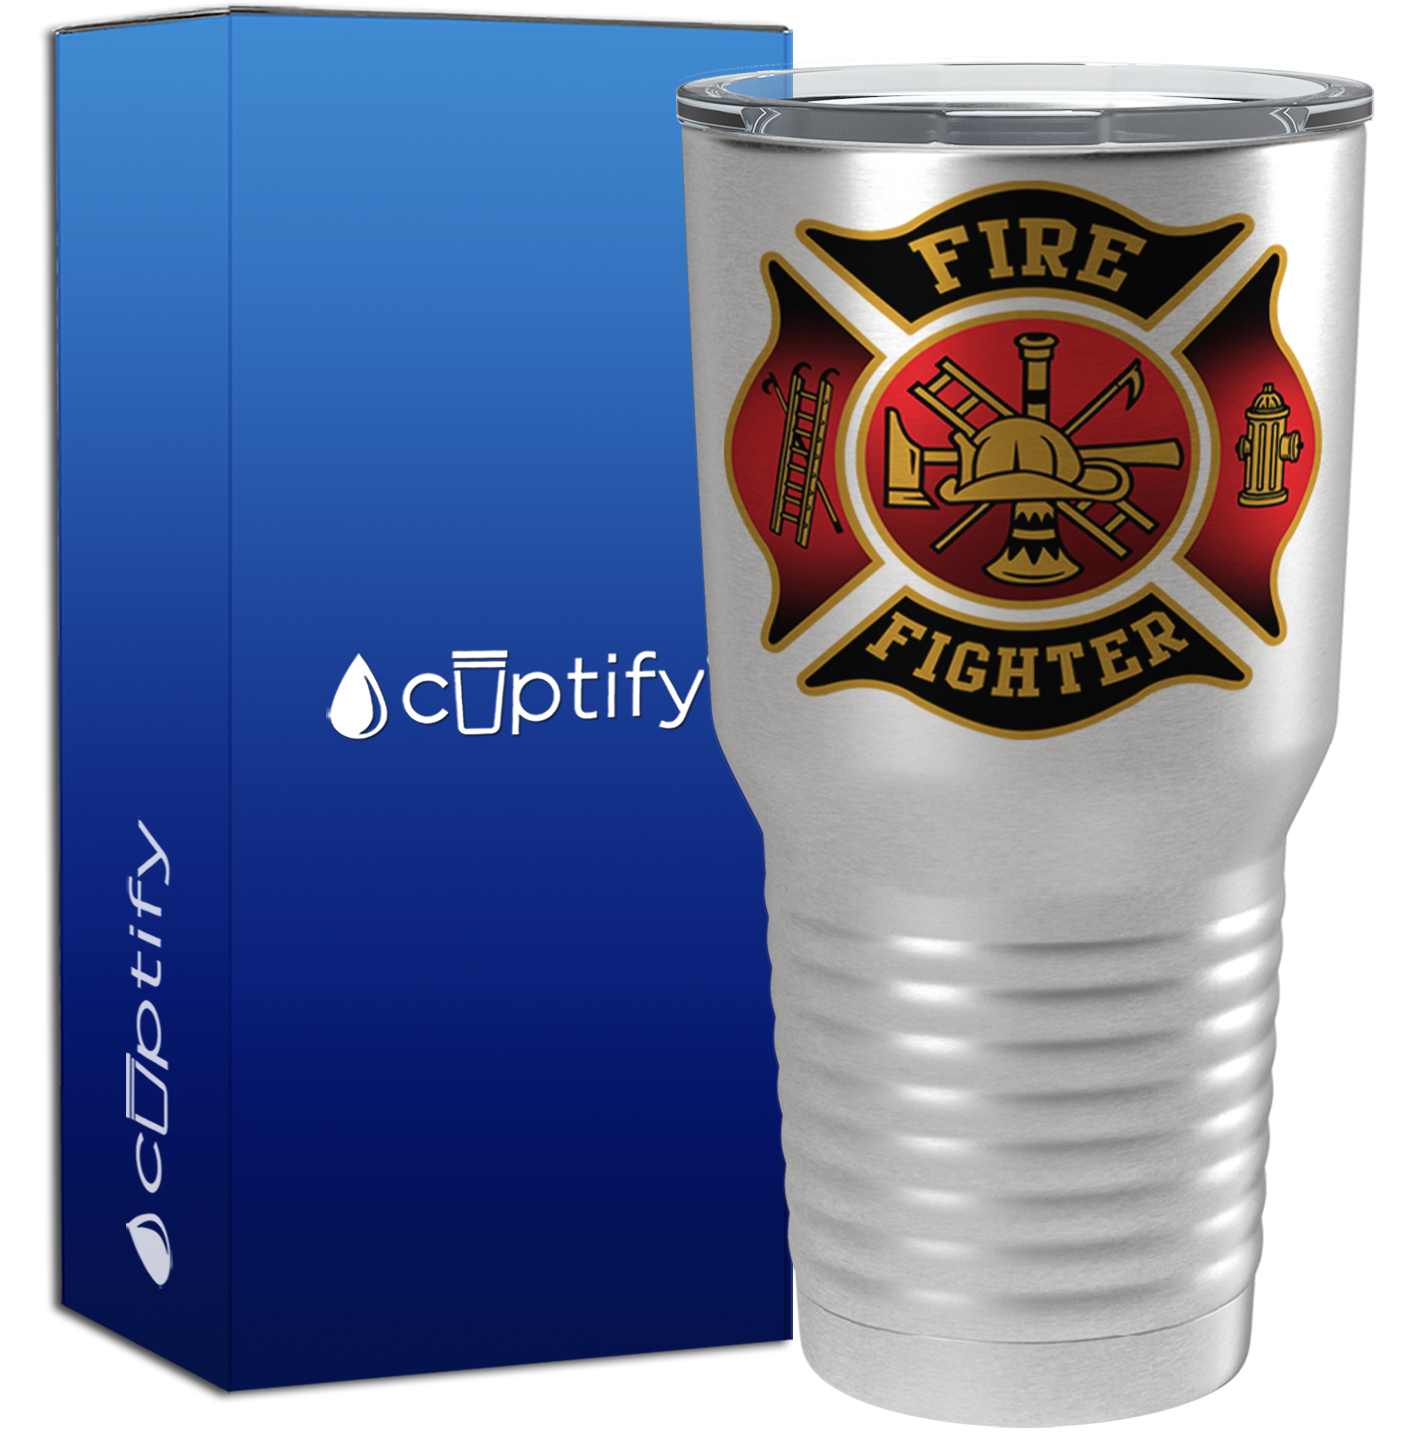 Red and Black Fire Department Badge on Stainless 30oz Firefighter Tumbler